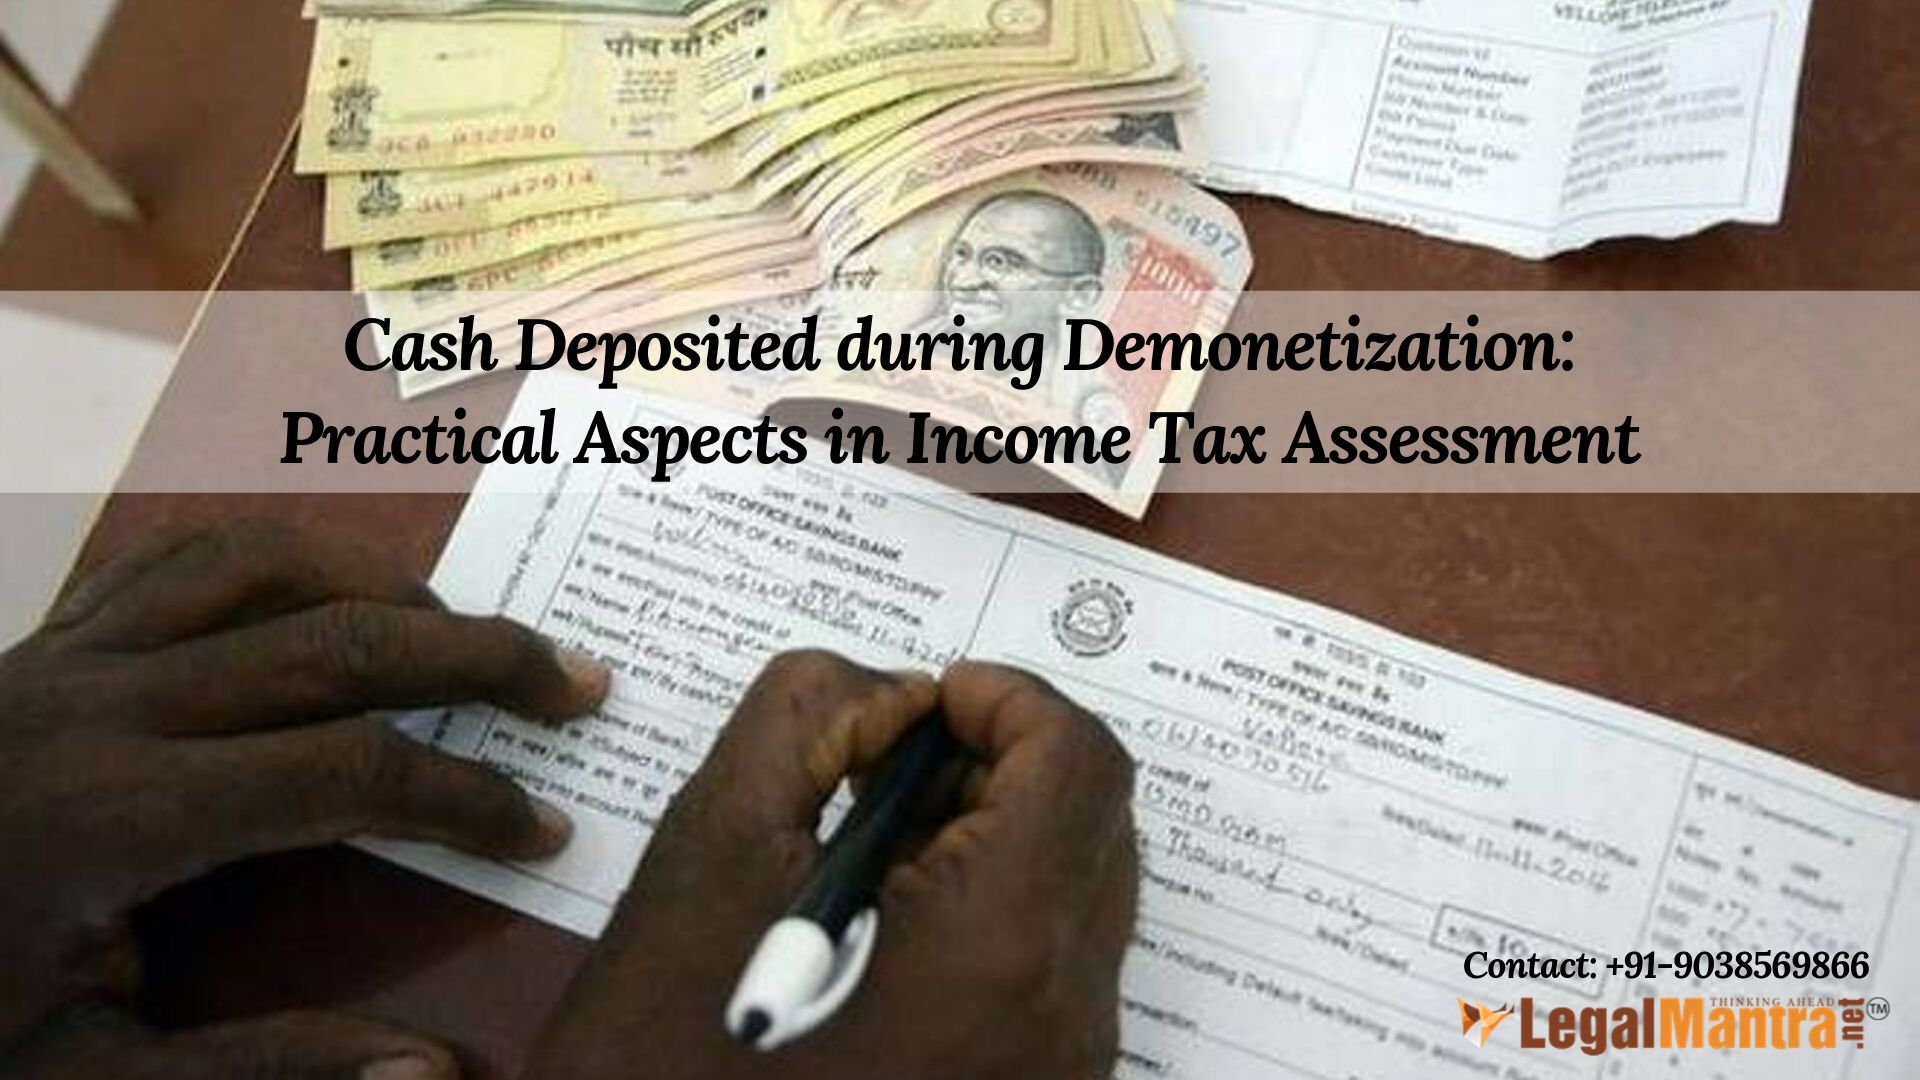 Cash Deposited during Demonetization: Practical Aspects in Income Tax Assessment